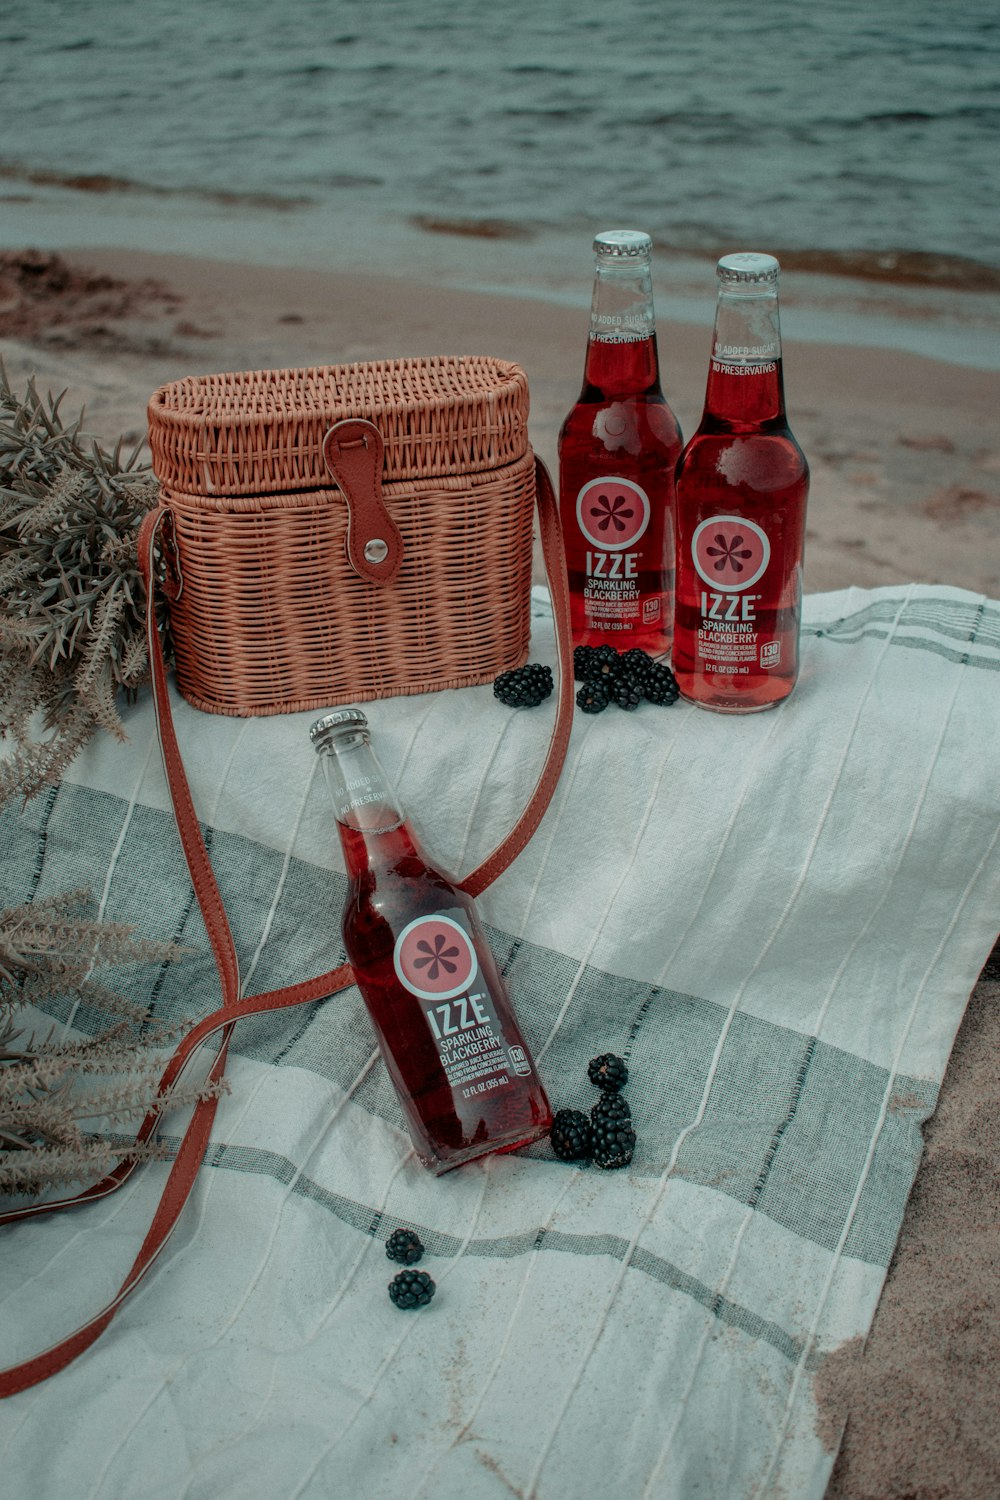 red and white labeled bottle beside brown woven basket